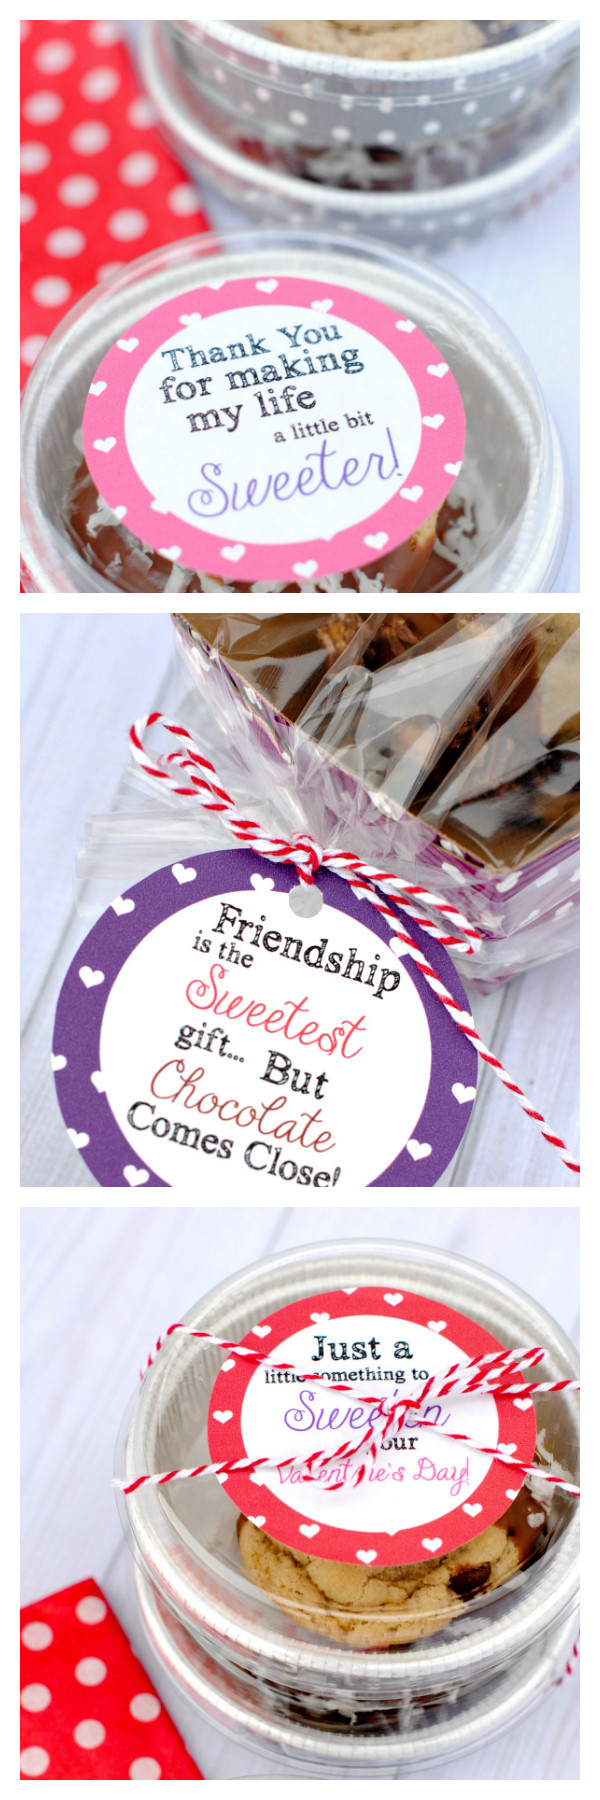 Funny Valentine Gift Ideas
 Cute Valentine s Gift Tags & Packaging Ideas Crazy